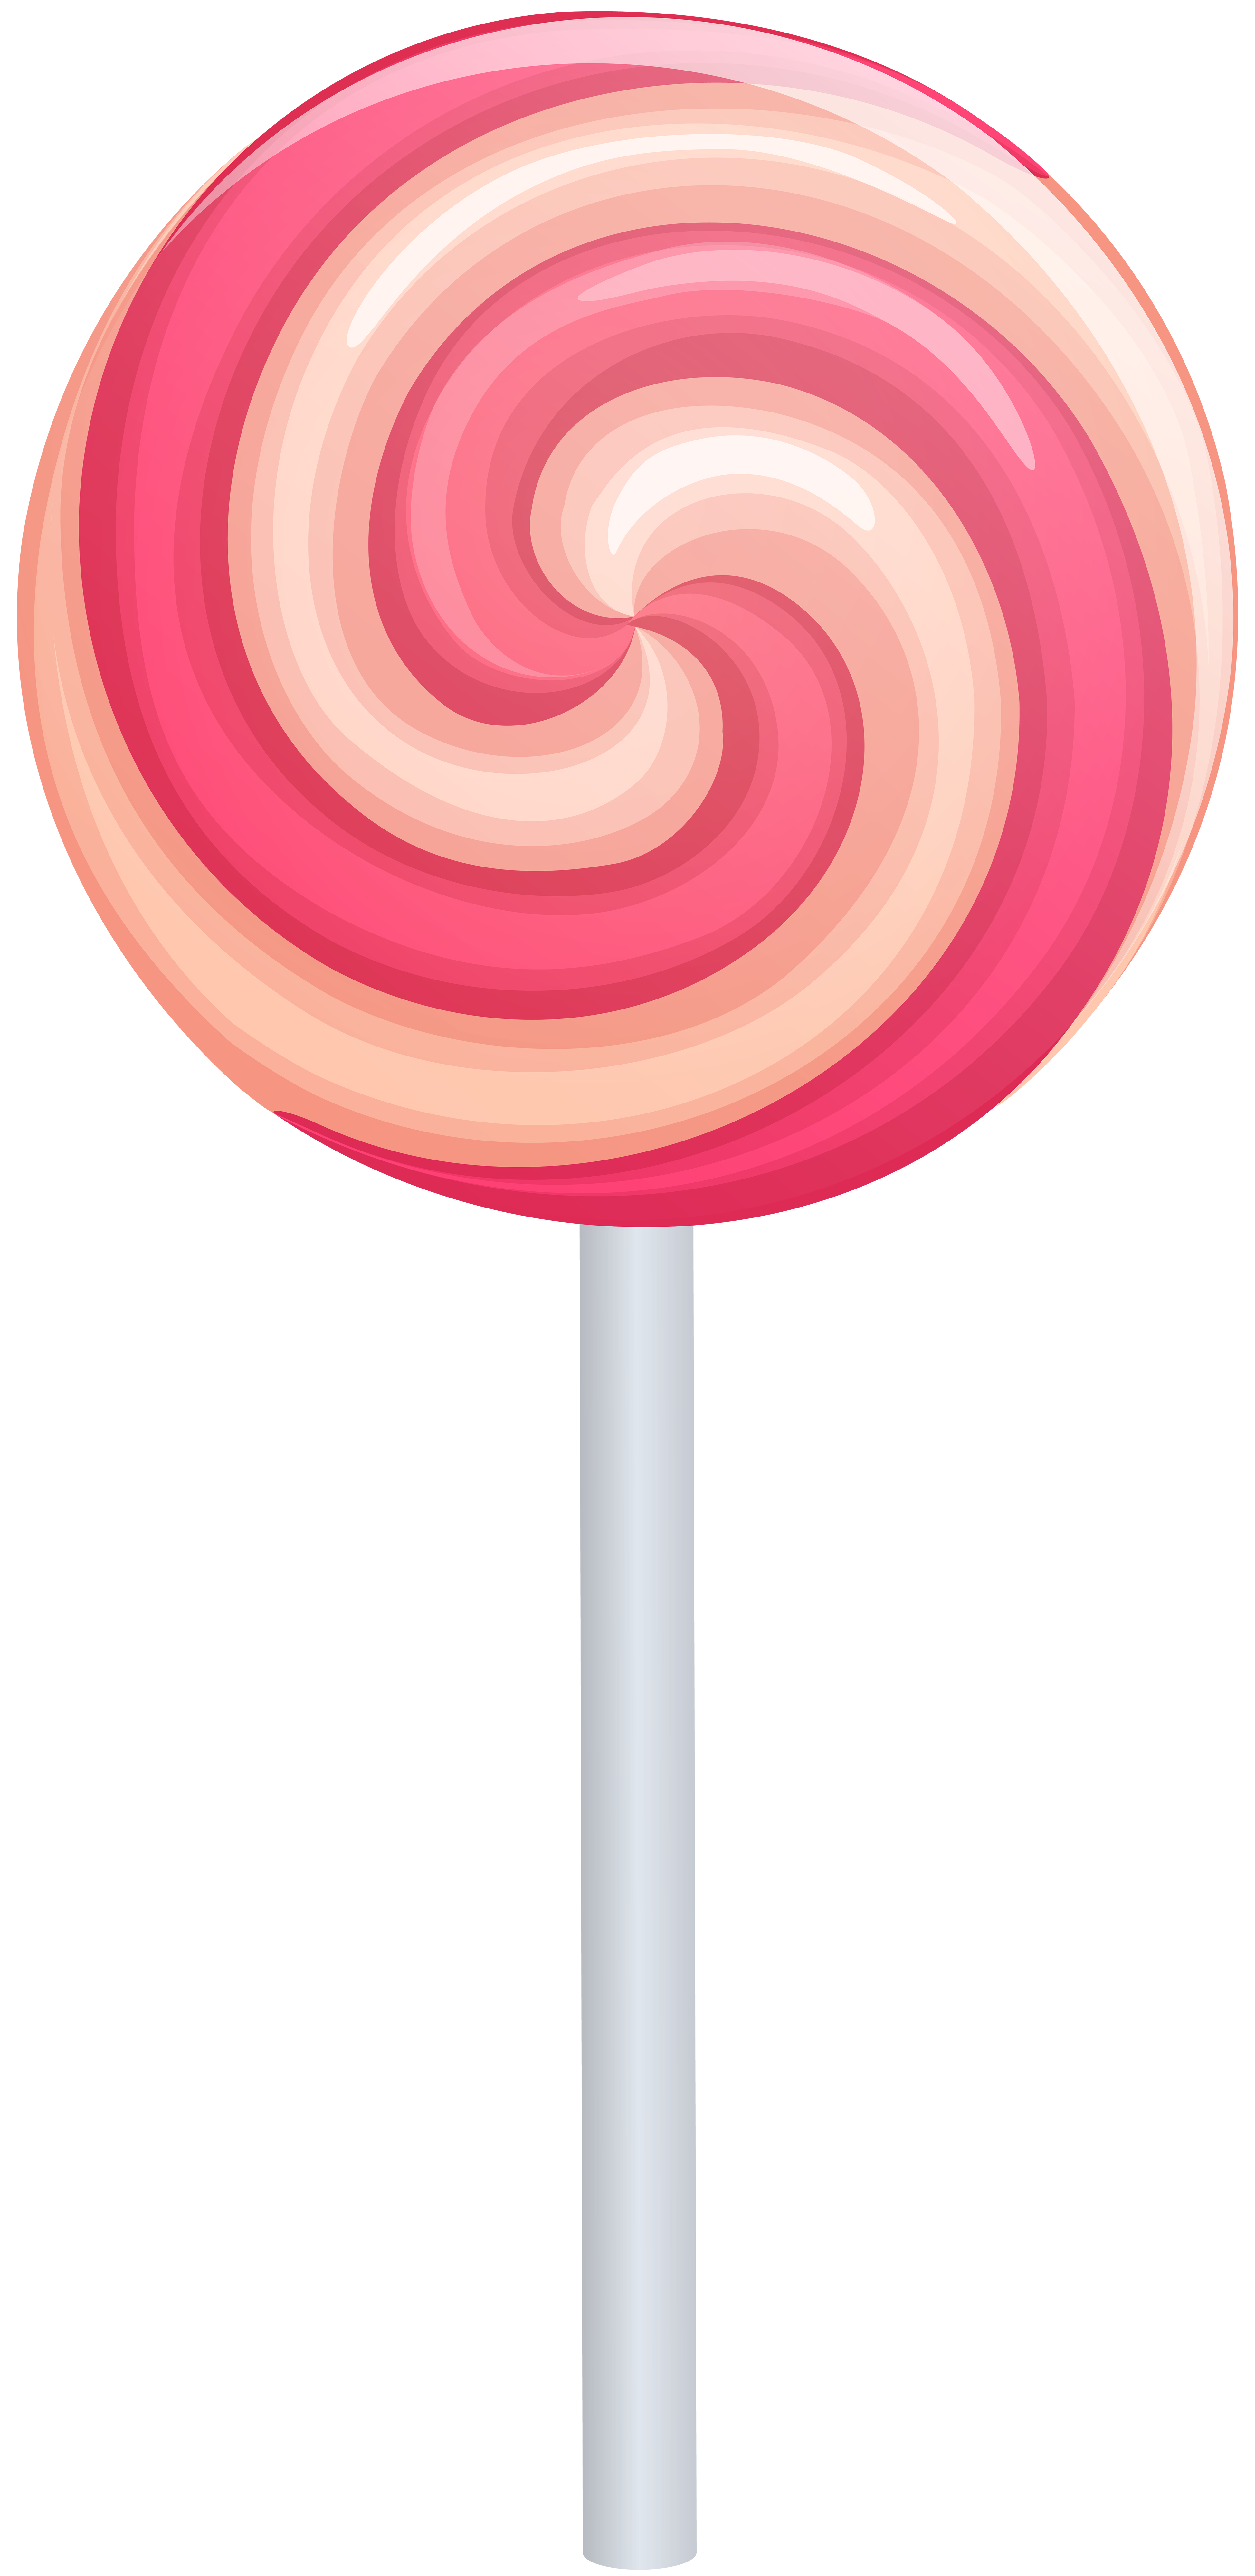 Pink Swirl Lollipop Image Png Images Clipart